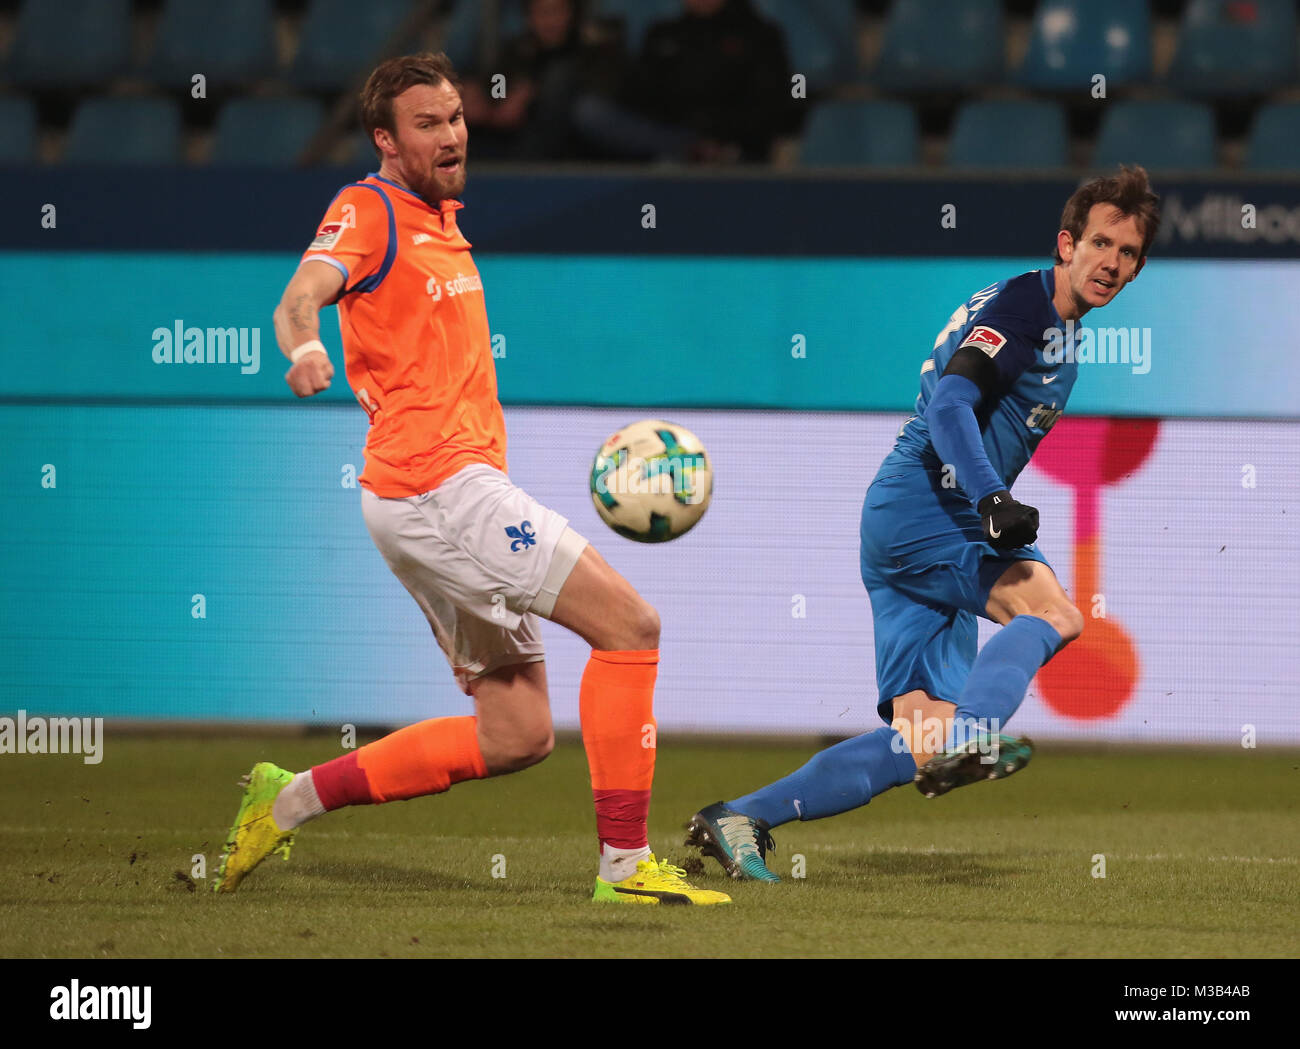 Bochum, Germany February 9 2018, 2nd league matchday 22, VfL Bochum 1848 - SV Darmstadt 98: Kevin Grosskreutz (Darmstadt) and Robbie Kruse (Bochum) in competition. Stock Photo